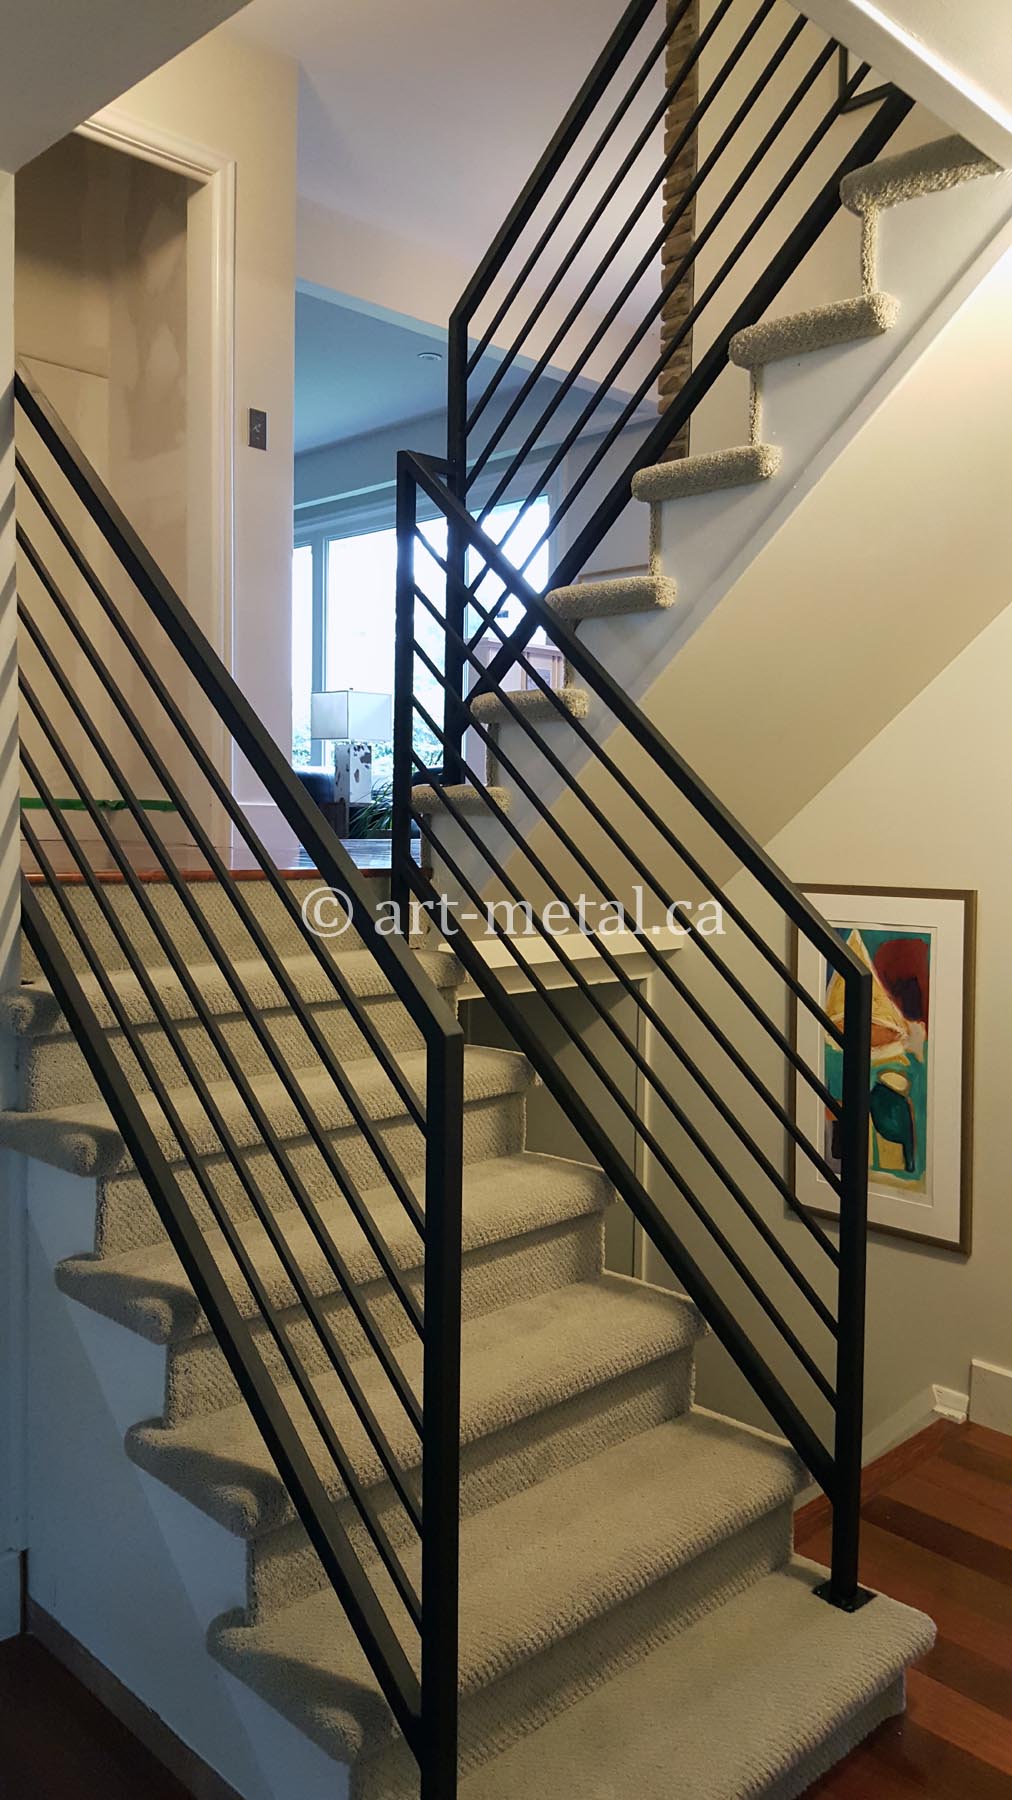 Interior Steel Stair Details Contemporary Interior  Stair  Railings for Your Modern Home